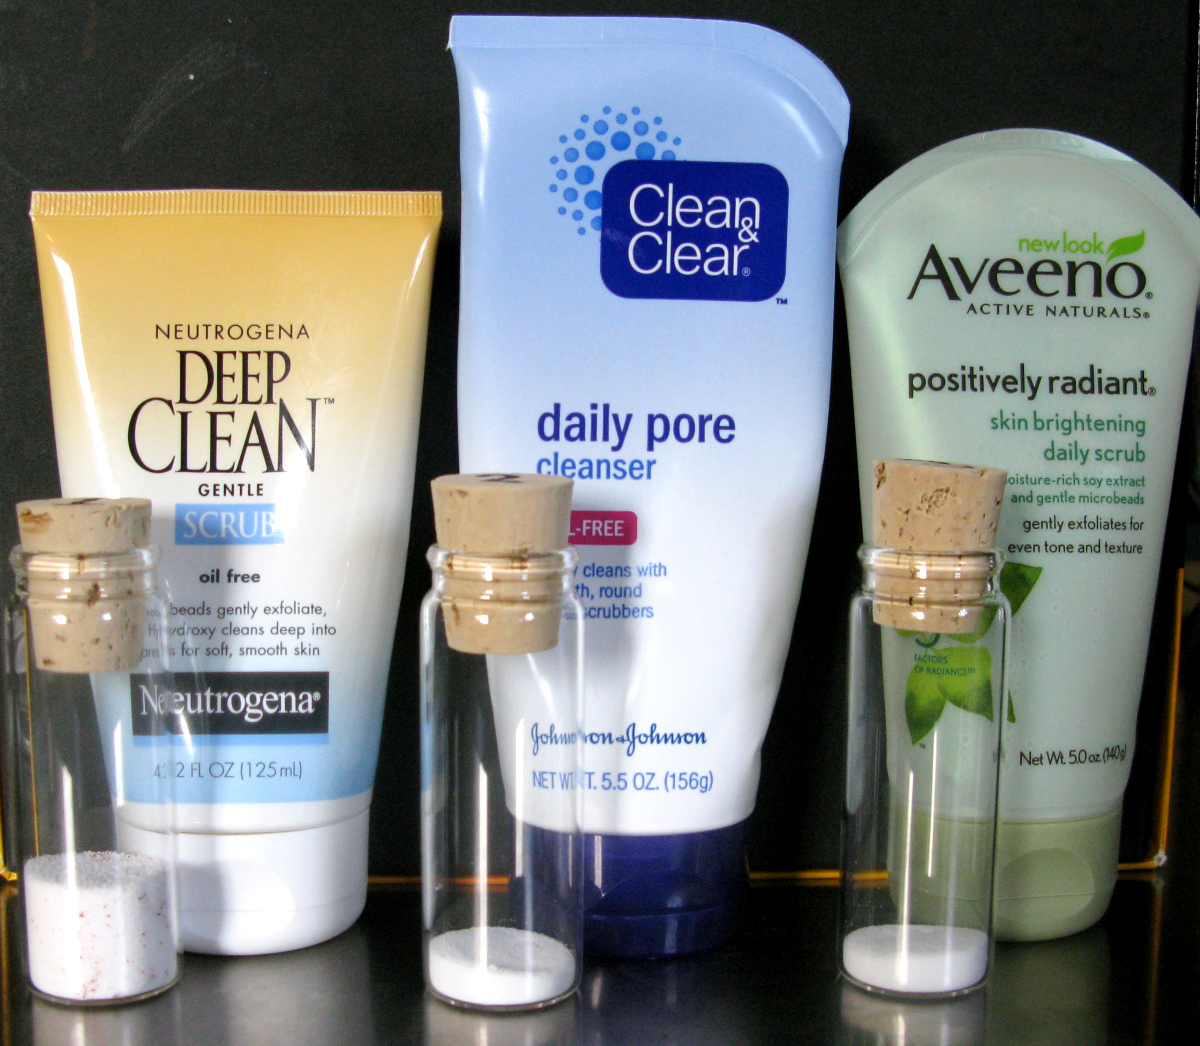 Vials of microbeads alongside products that use such small, plastic spheres.